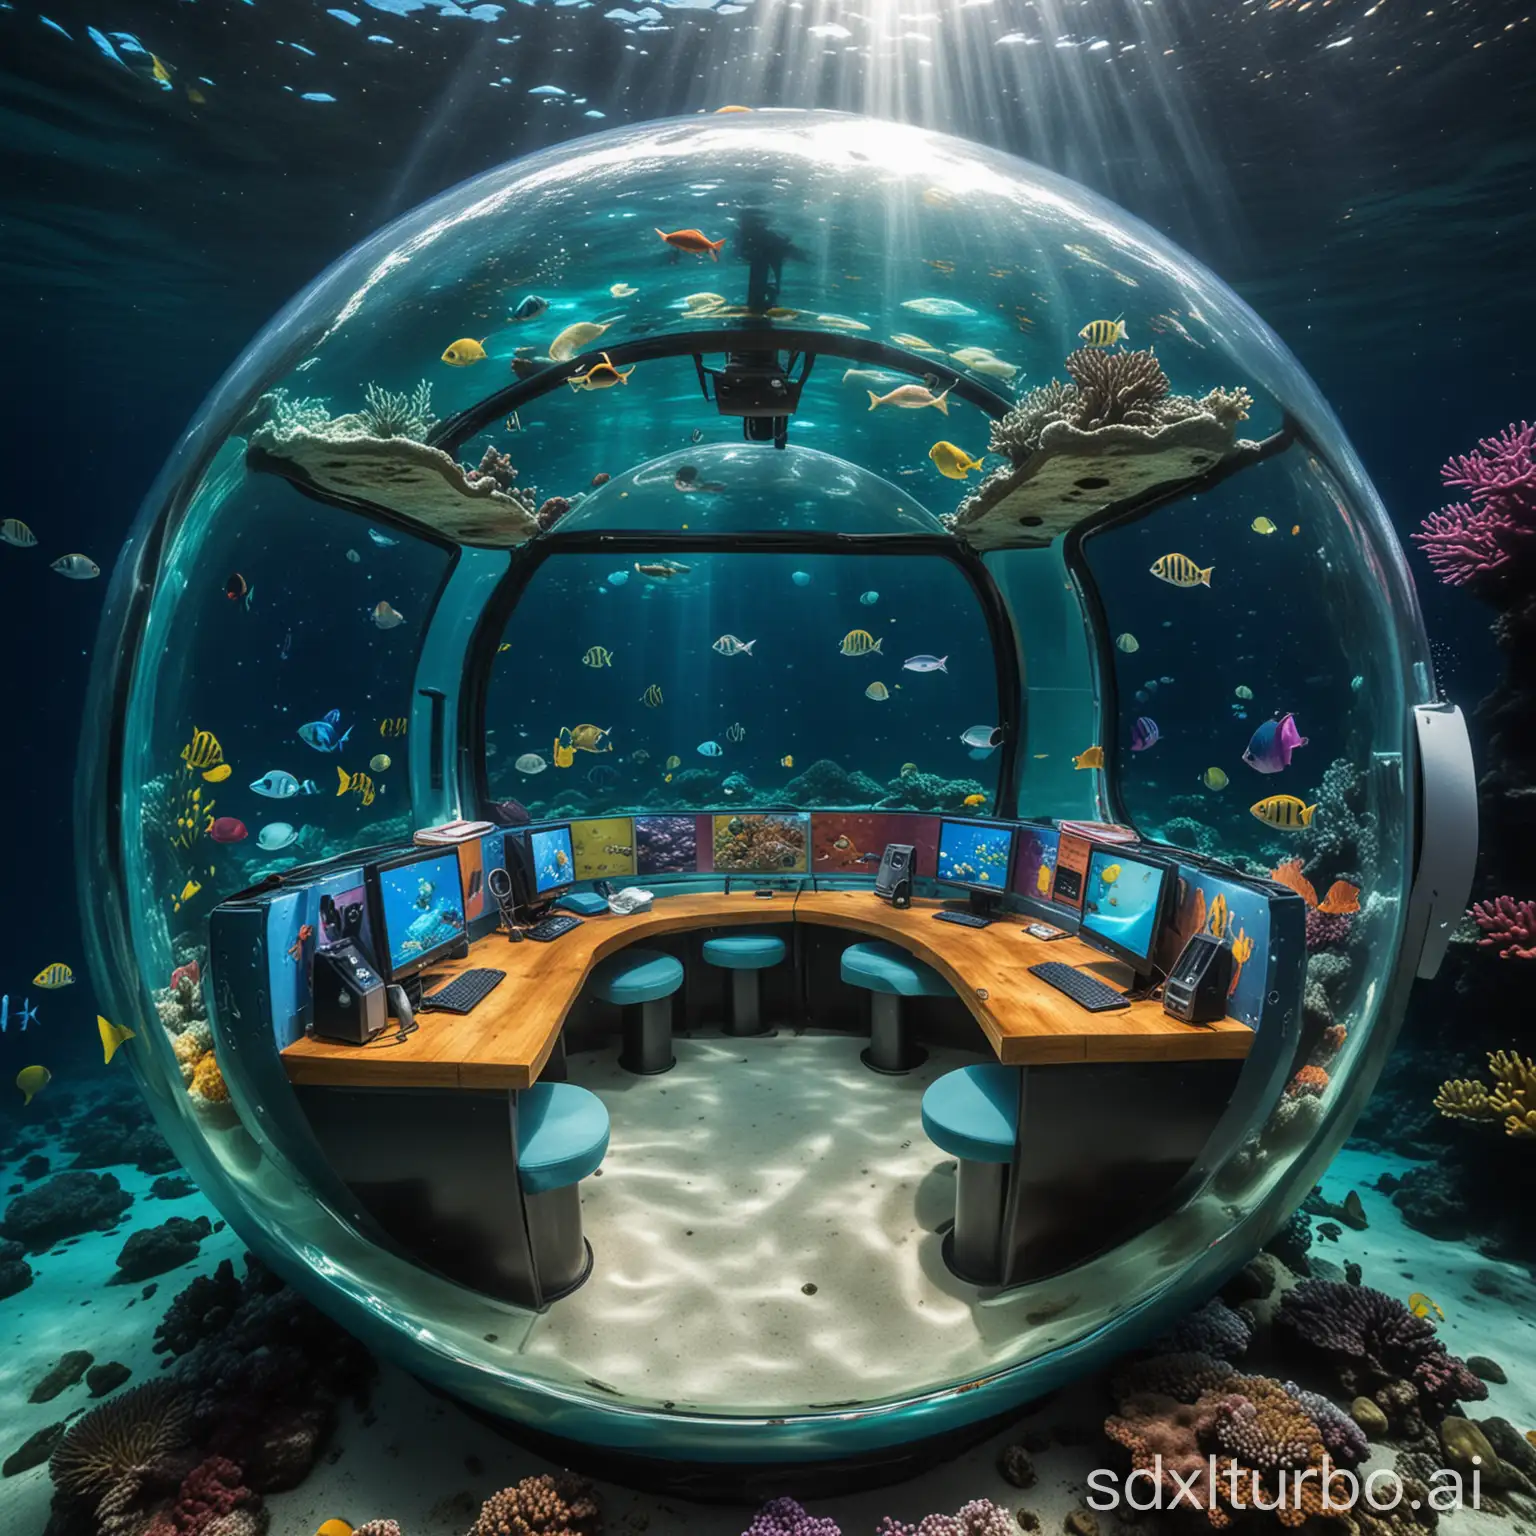 internet cafe underwater in spherical shape with four seats, circumstances similar to the Great Barrier Reef, colorful fish